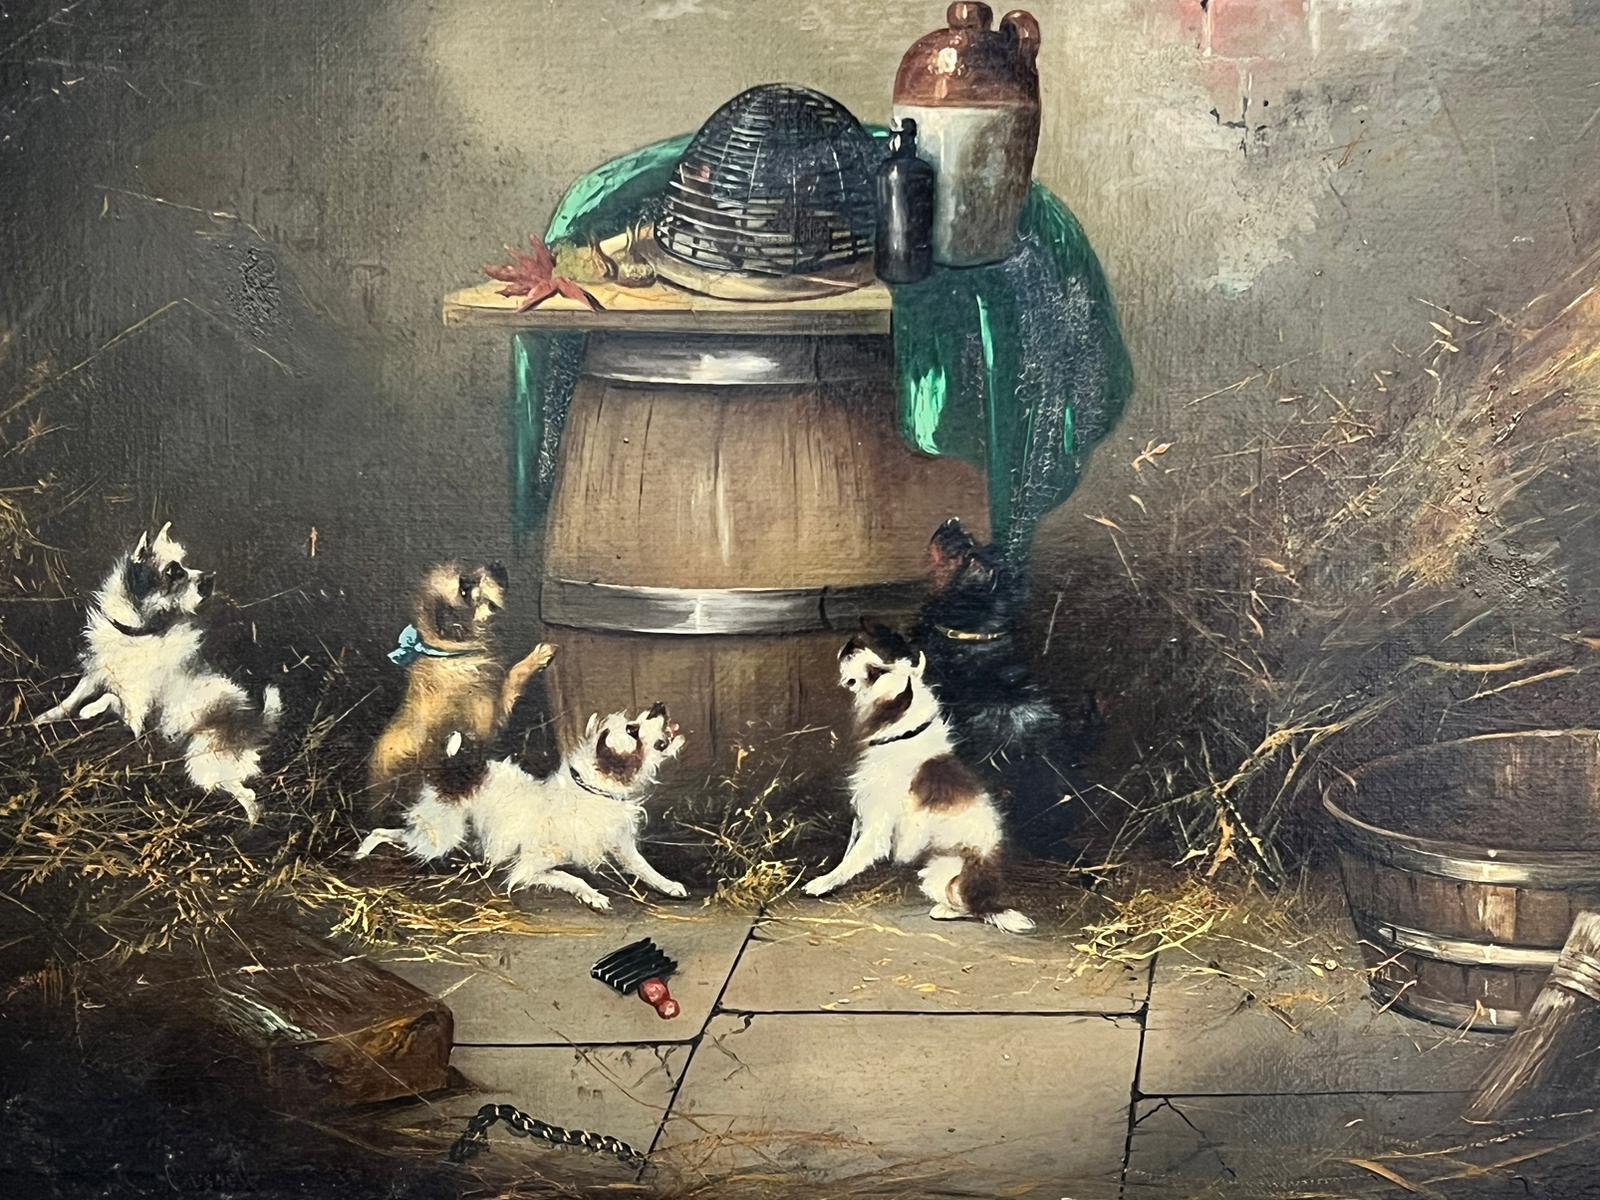 Terriers Ratting
by Frank Cassell (British late 19th century)
oil painting on canvas, framed
framed: 18 x 23 inches
canvas: 12 x 16 inches
provenance: private collection, England 
condition: overall very good